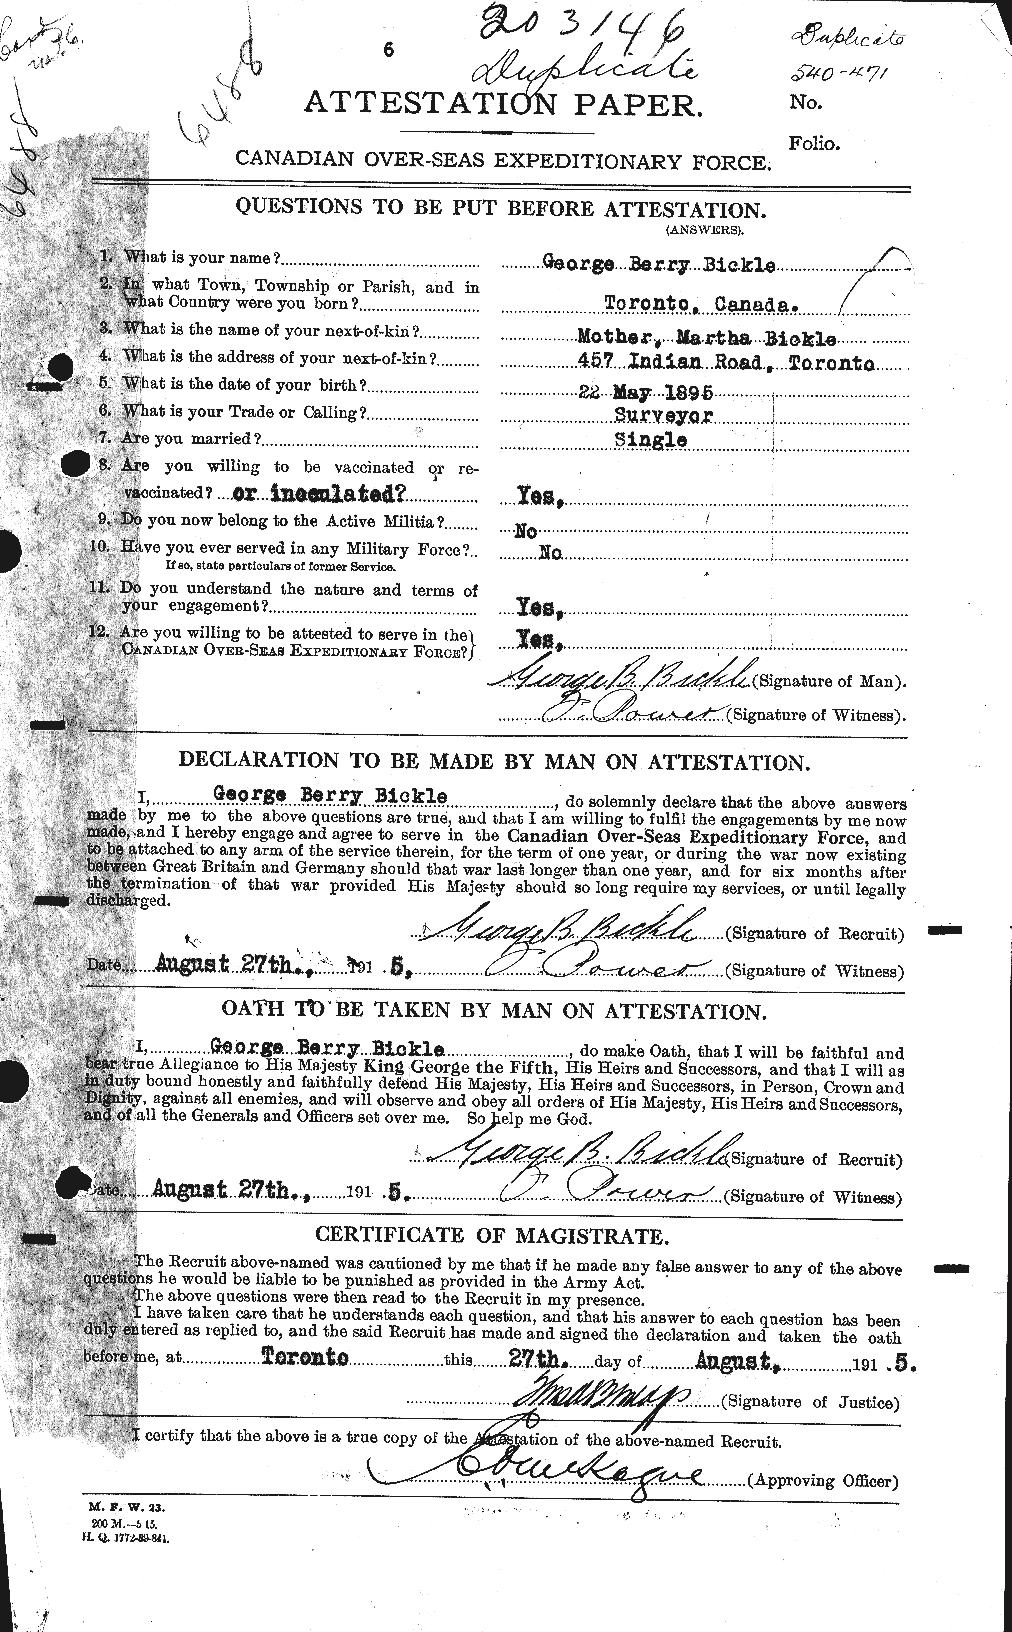 Personnel Records of the First World War - CEF 244897a